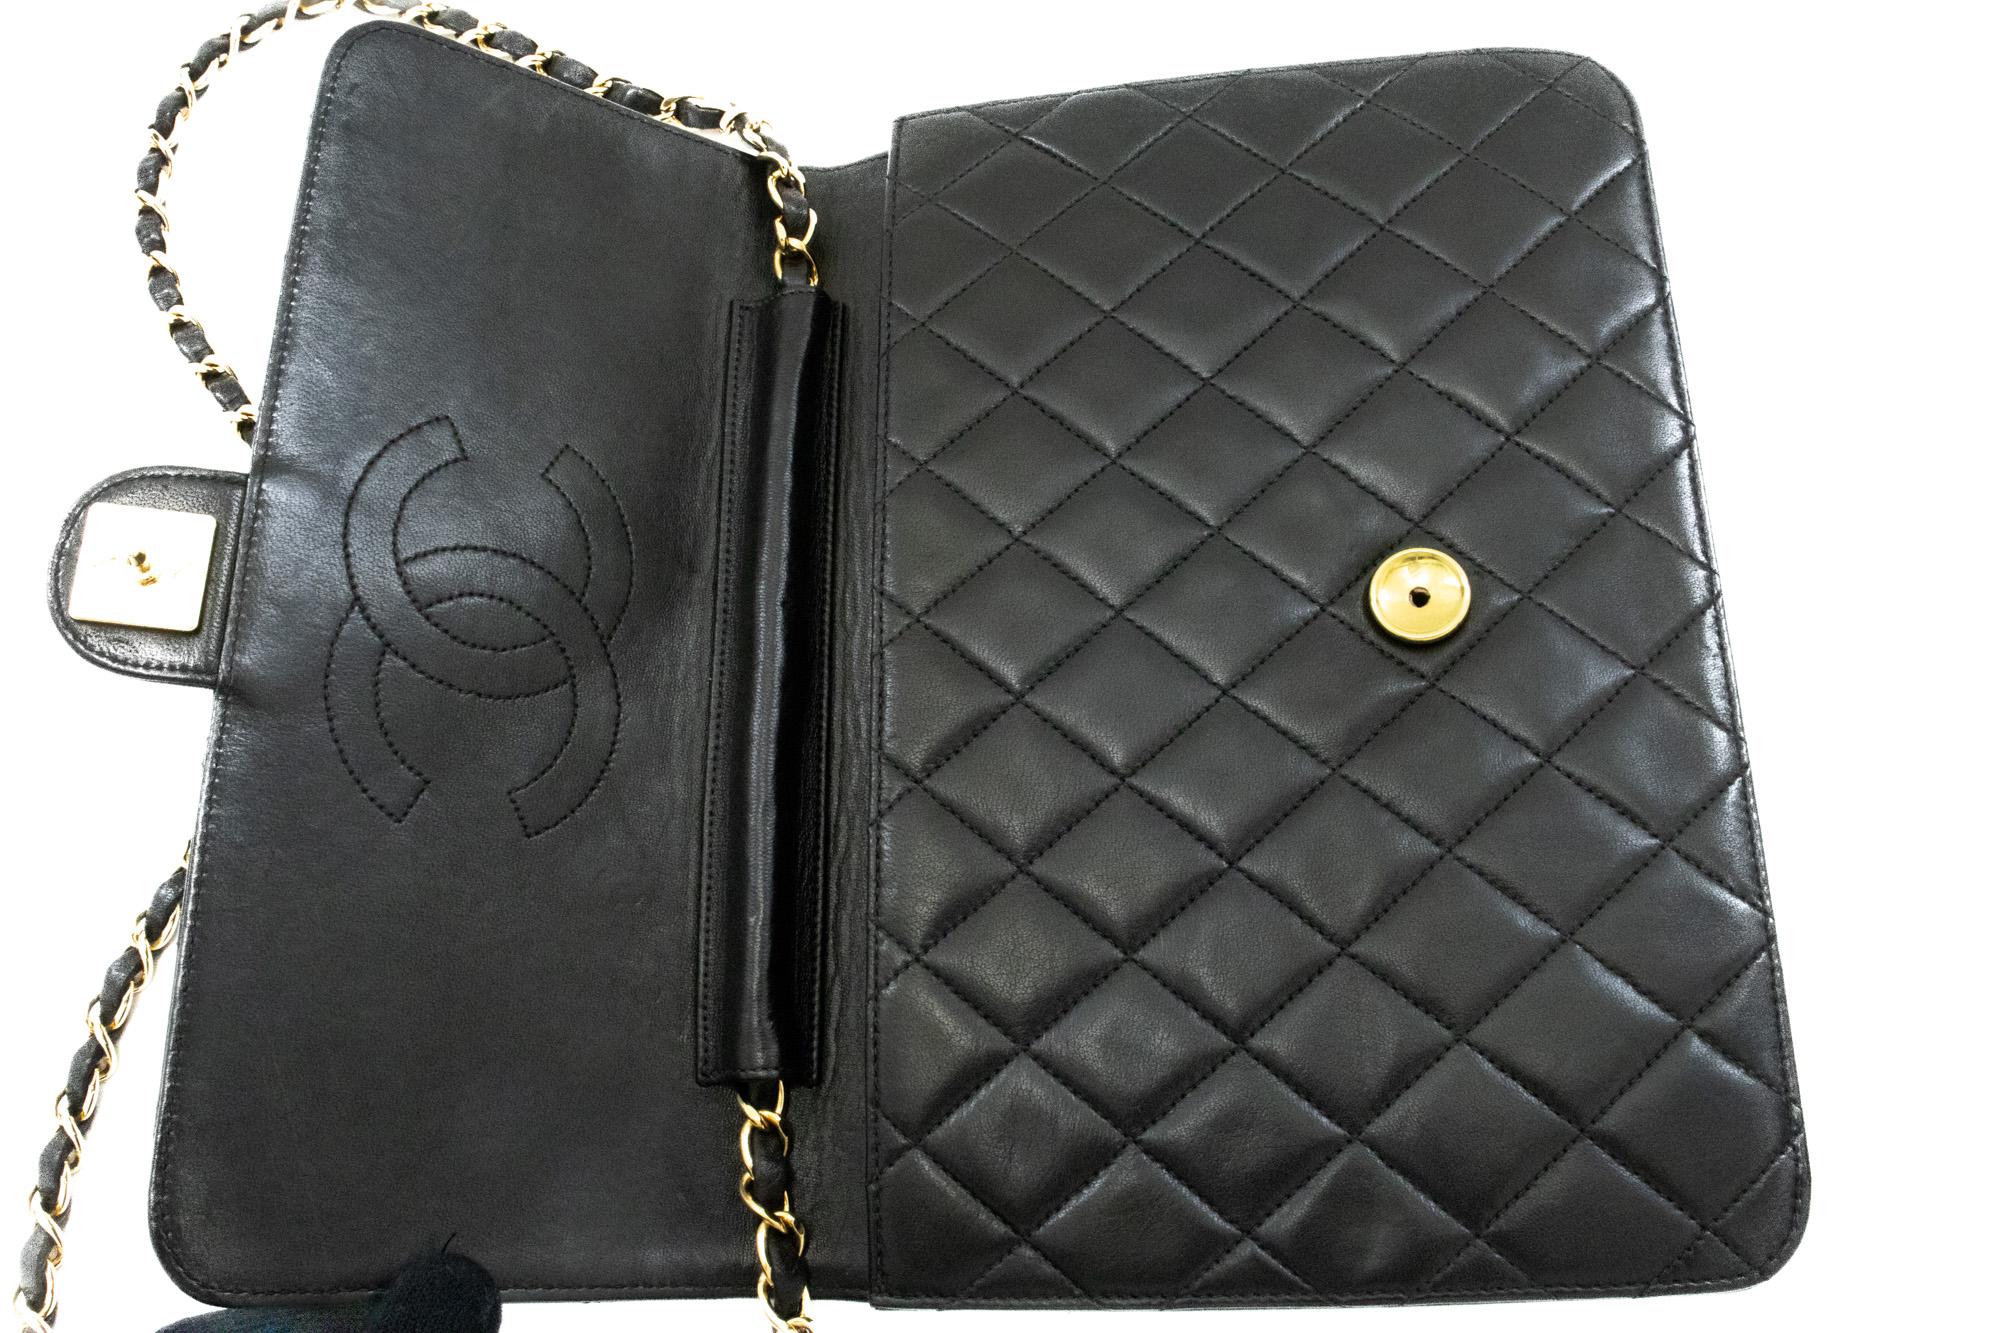 CHANEL Chain Shoulder Bag Black Clutch Flap Quilted Purse Lambskin 5